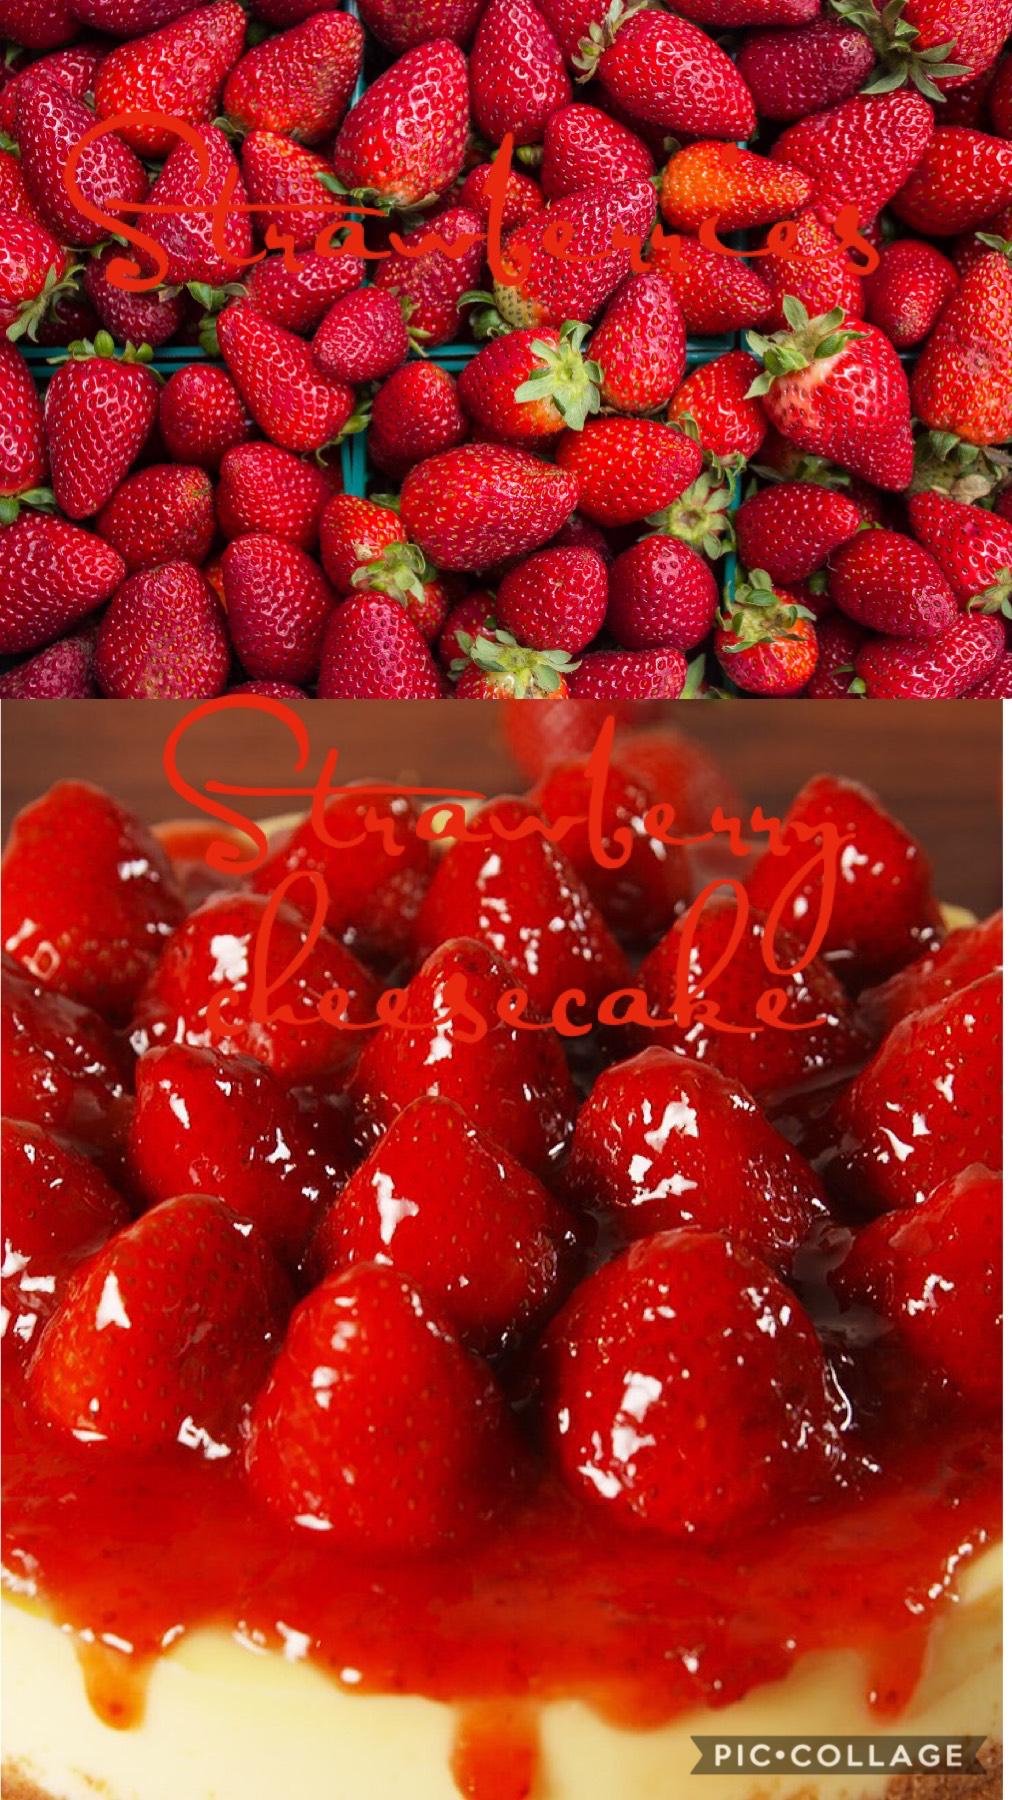 Top is regular strawberries or bottom strawberry cheesecake.like if like either one or two.